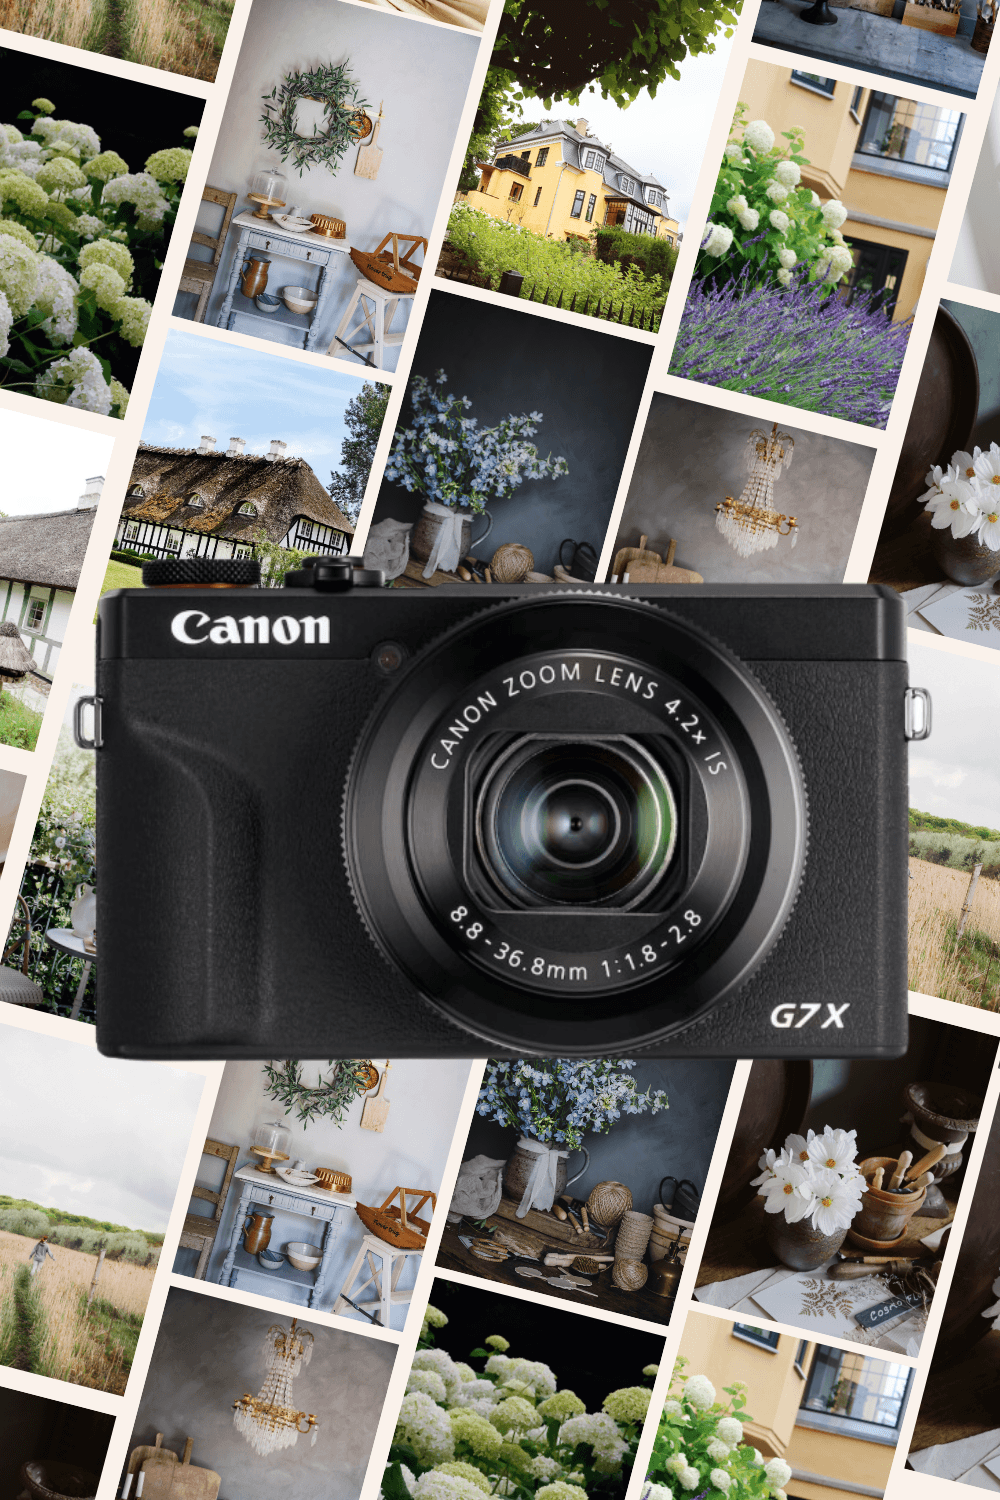 PowerShot G7 X Mark II Photo Review: Flawless Depiction, Superb Imagery